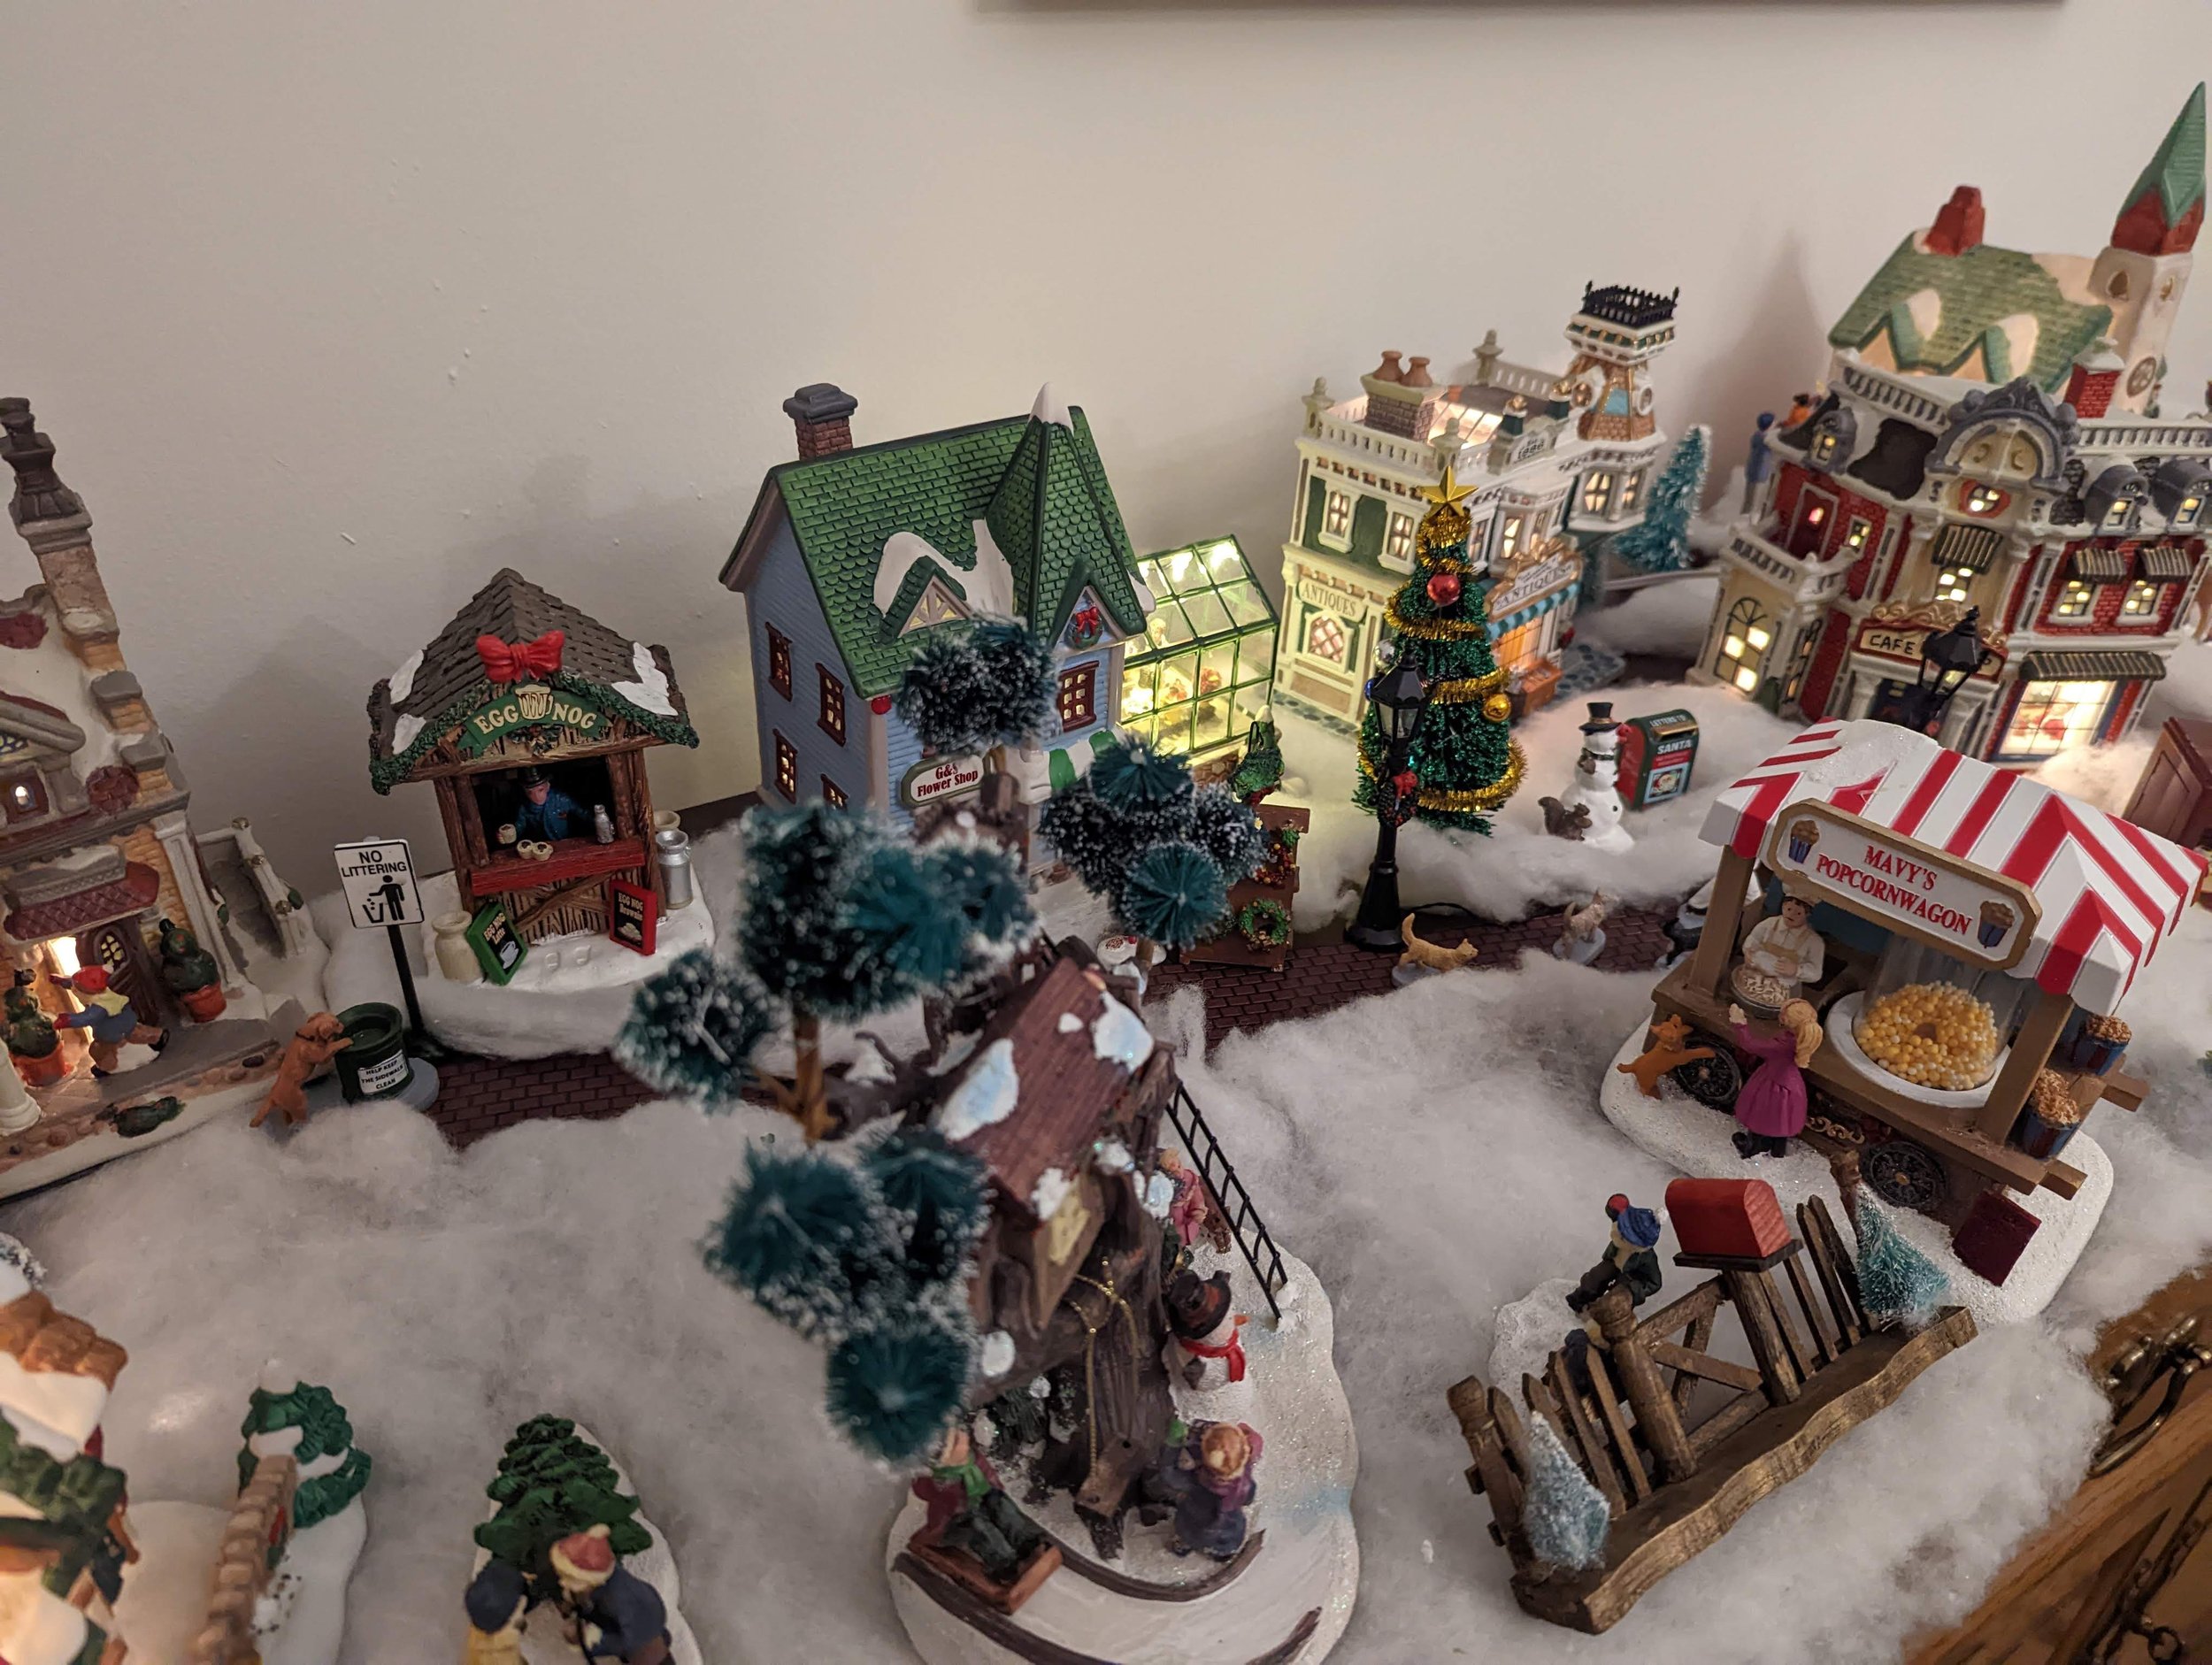  Christmas Village “After” photo! 